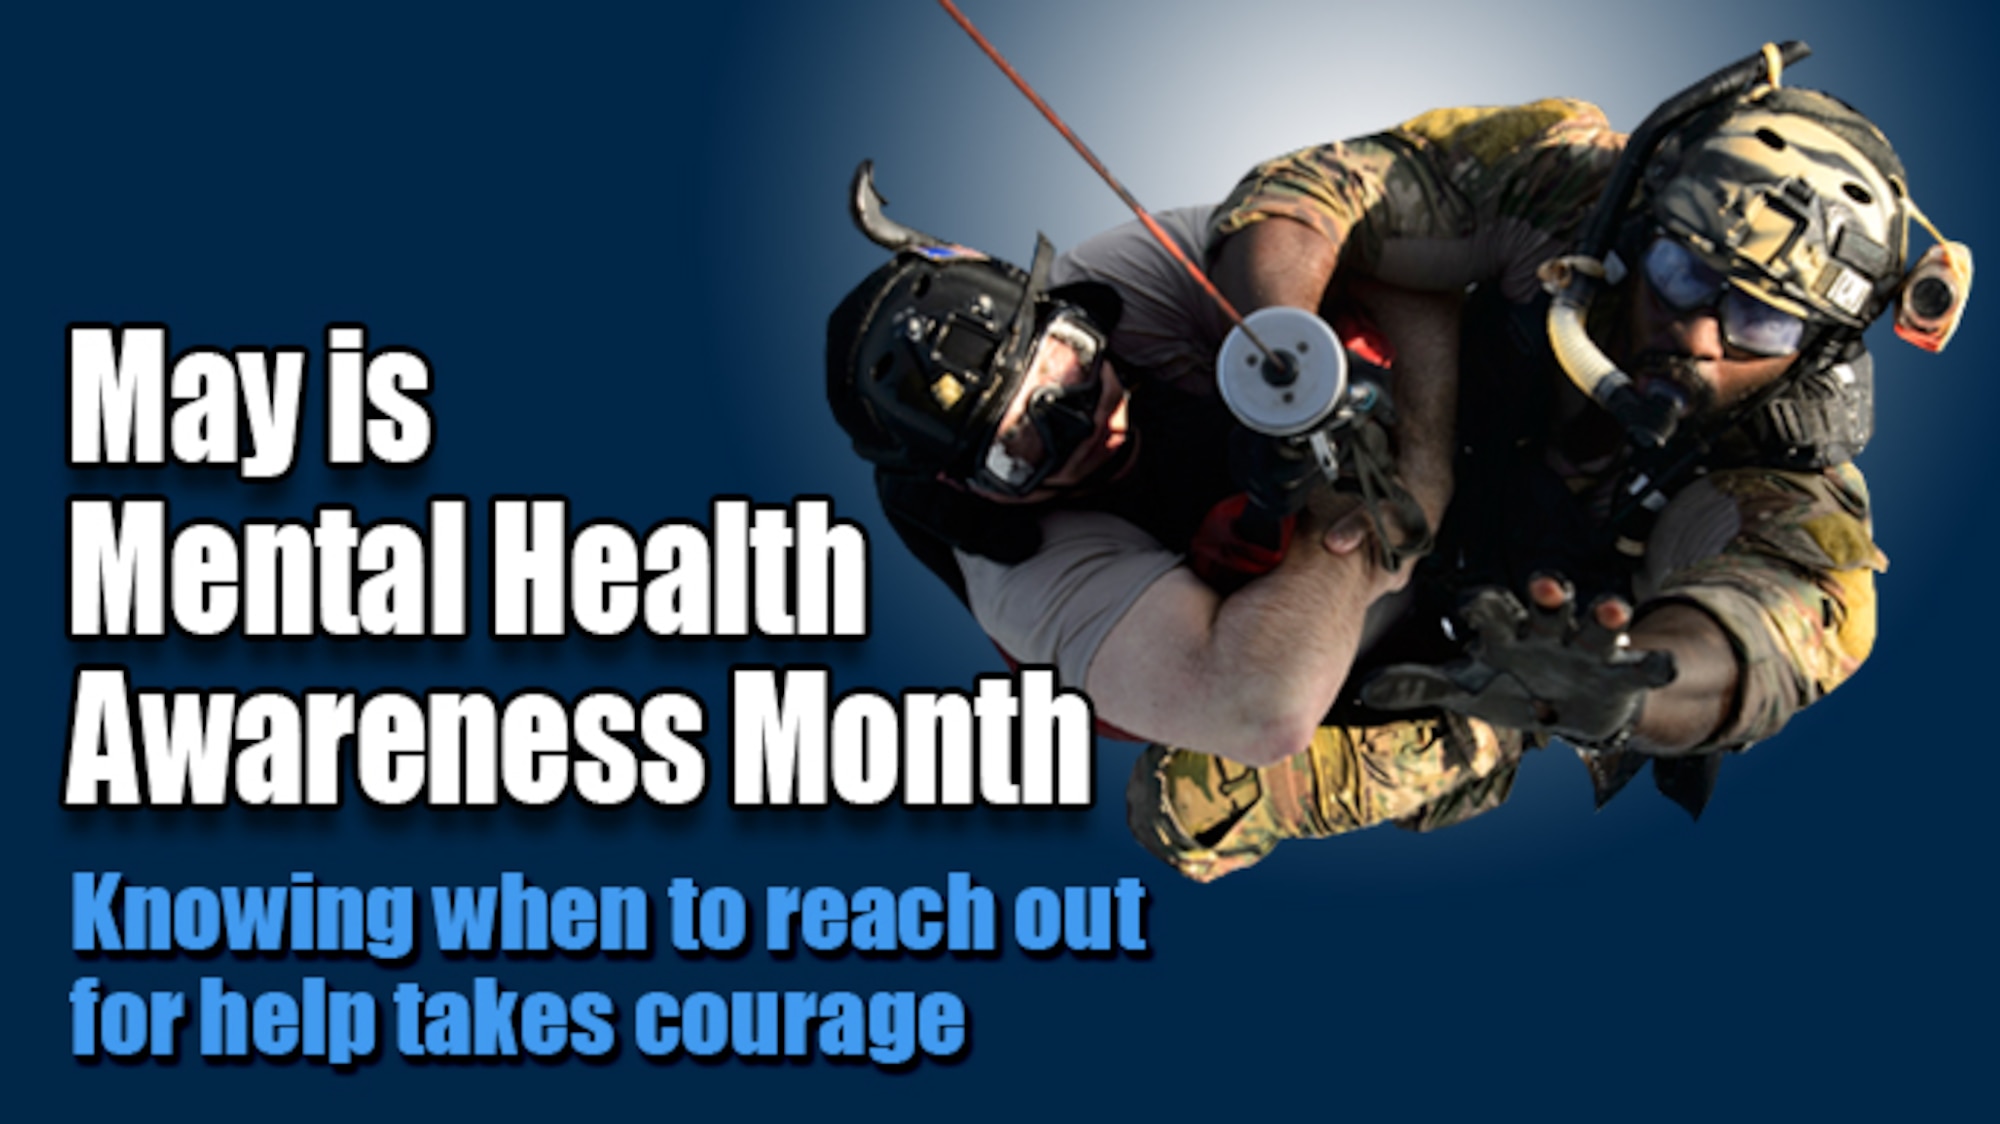 May is Mental Health Awareness Month (AF Graphic)